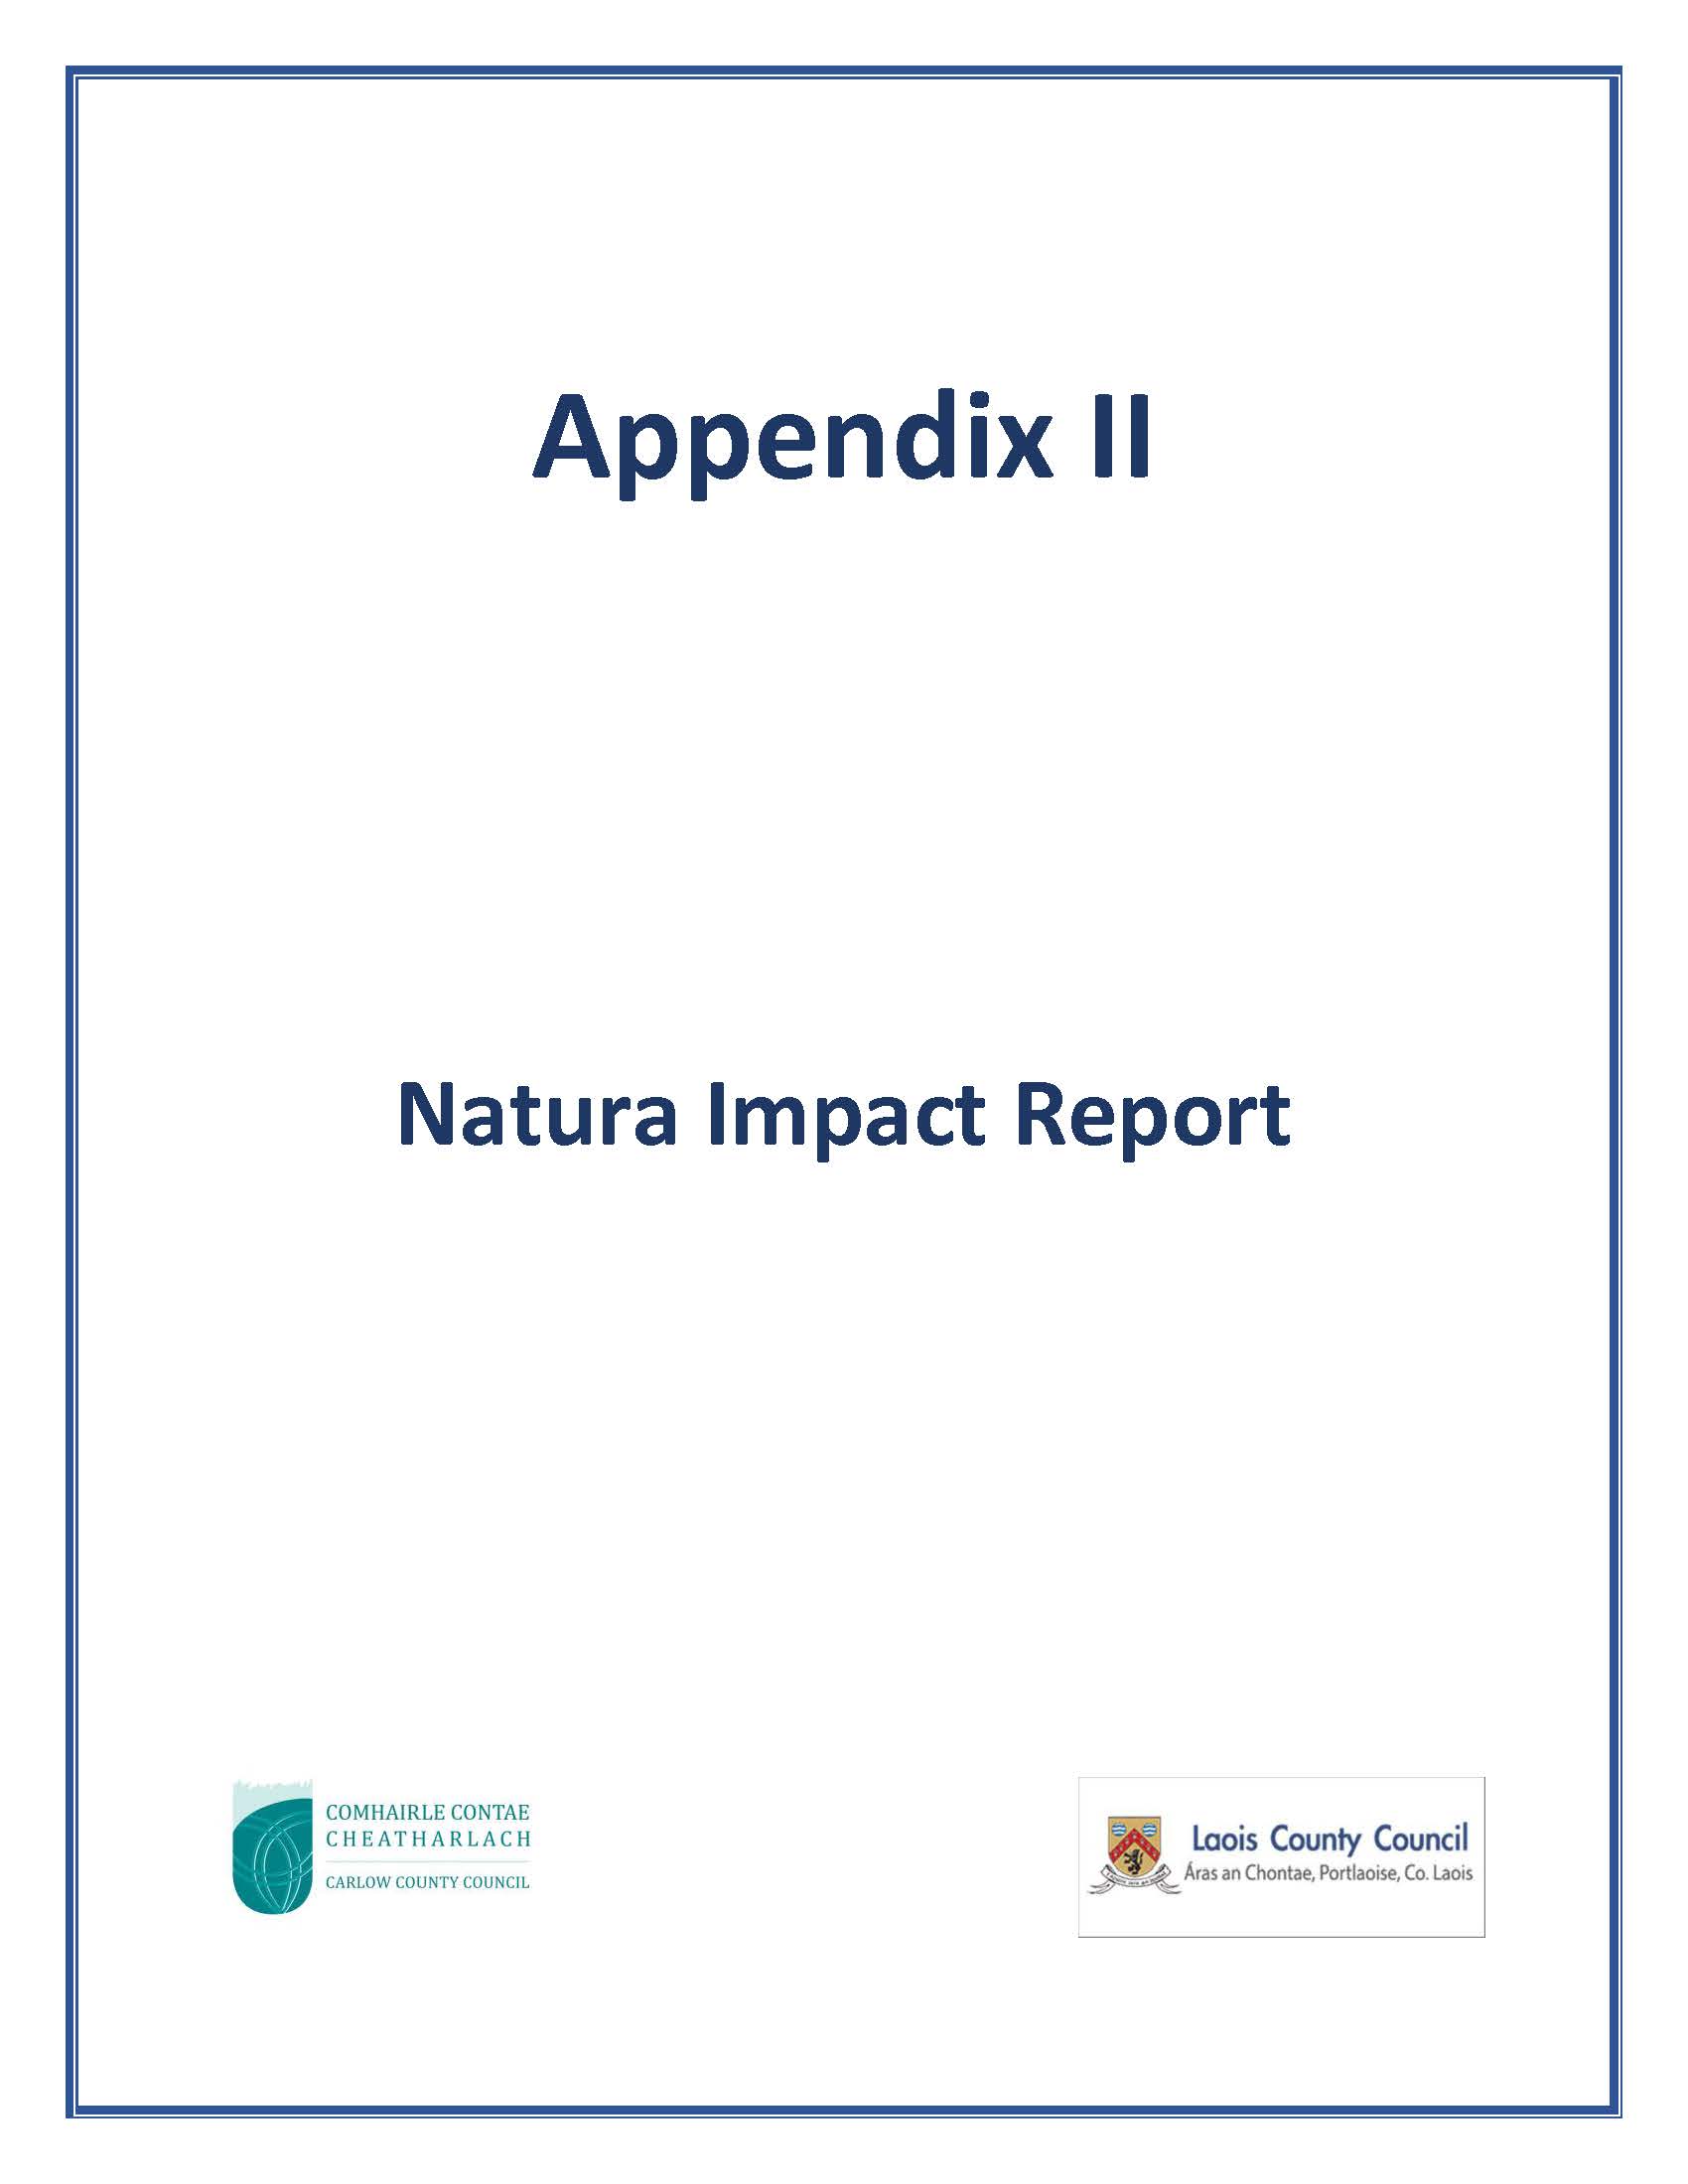 Appendix II cover page